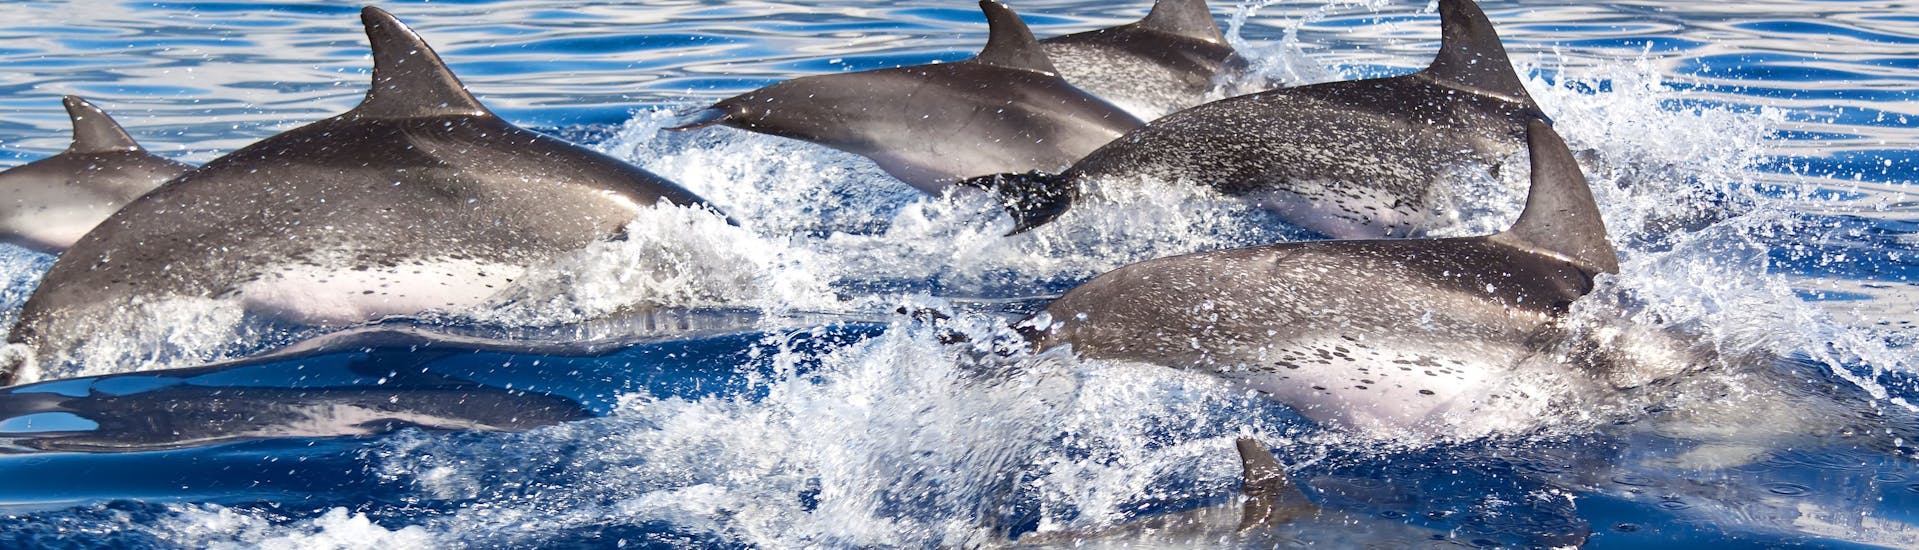 A group of dolphin is jumping over the water during the Catamaran Trip from Santa Ponsa & Andratx with Dolphin Watching with Cormoran Cruises Paguera.